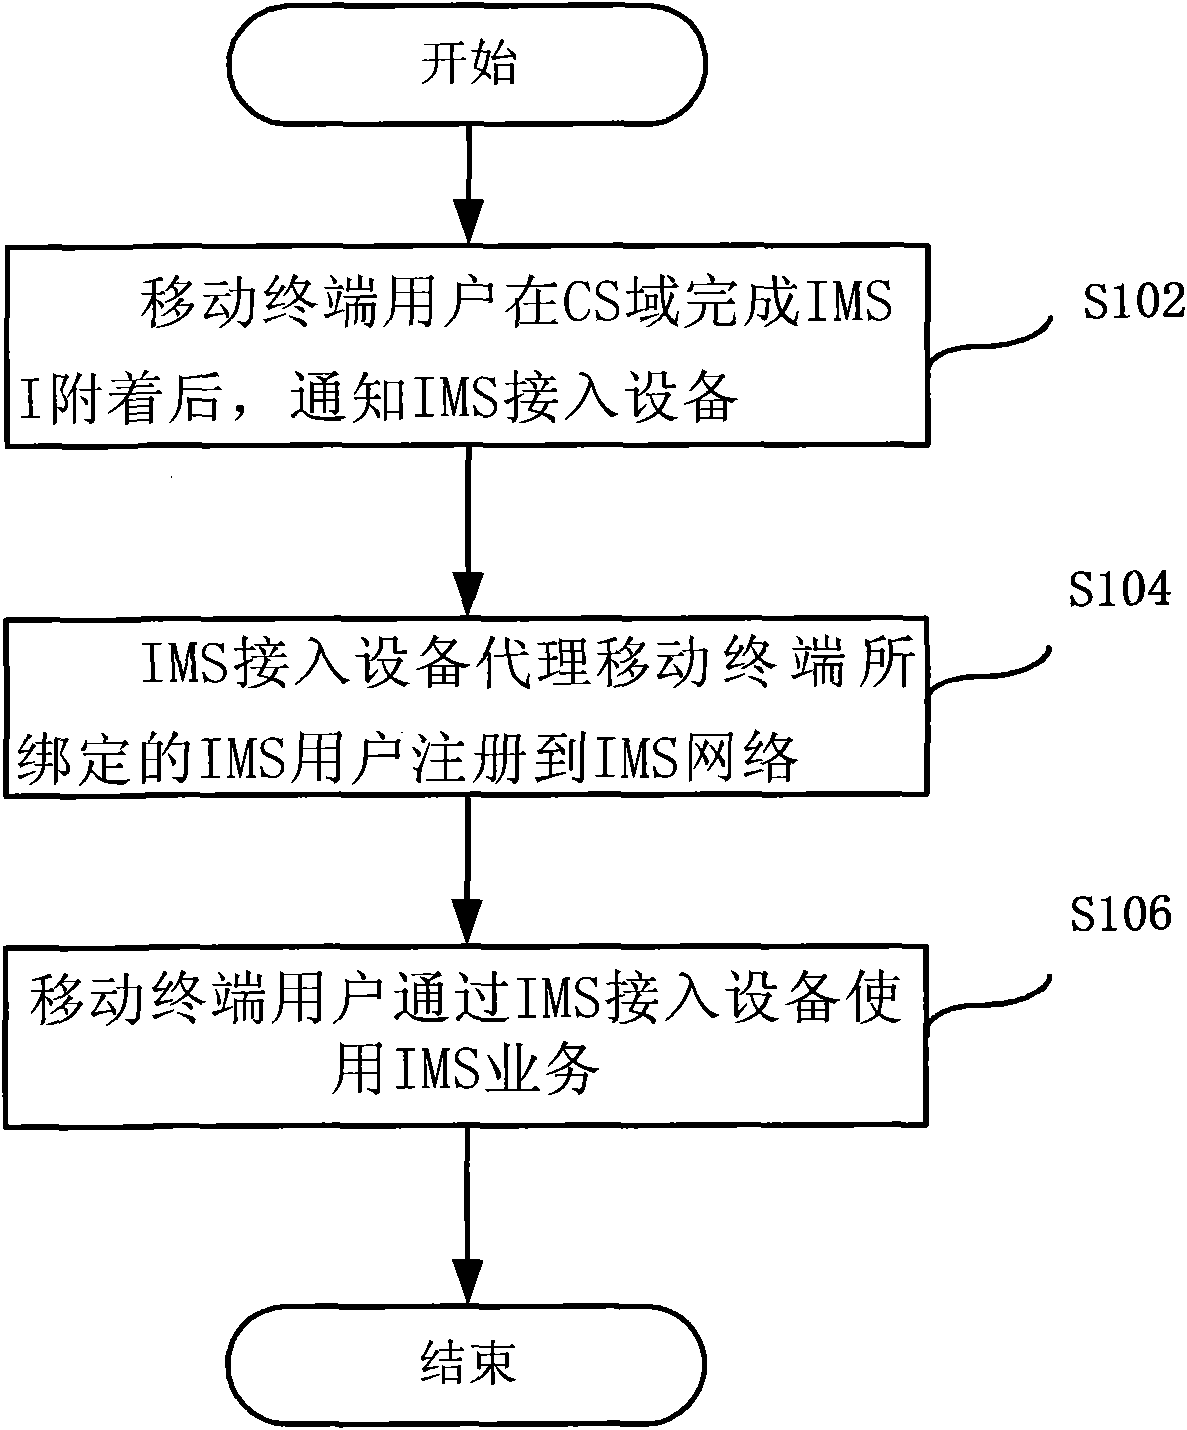 Method for using Internet protocol (IP) multimedia subsystem (IMS), equipment and system